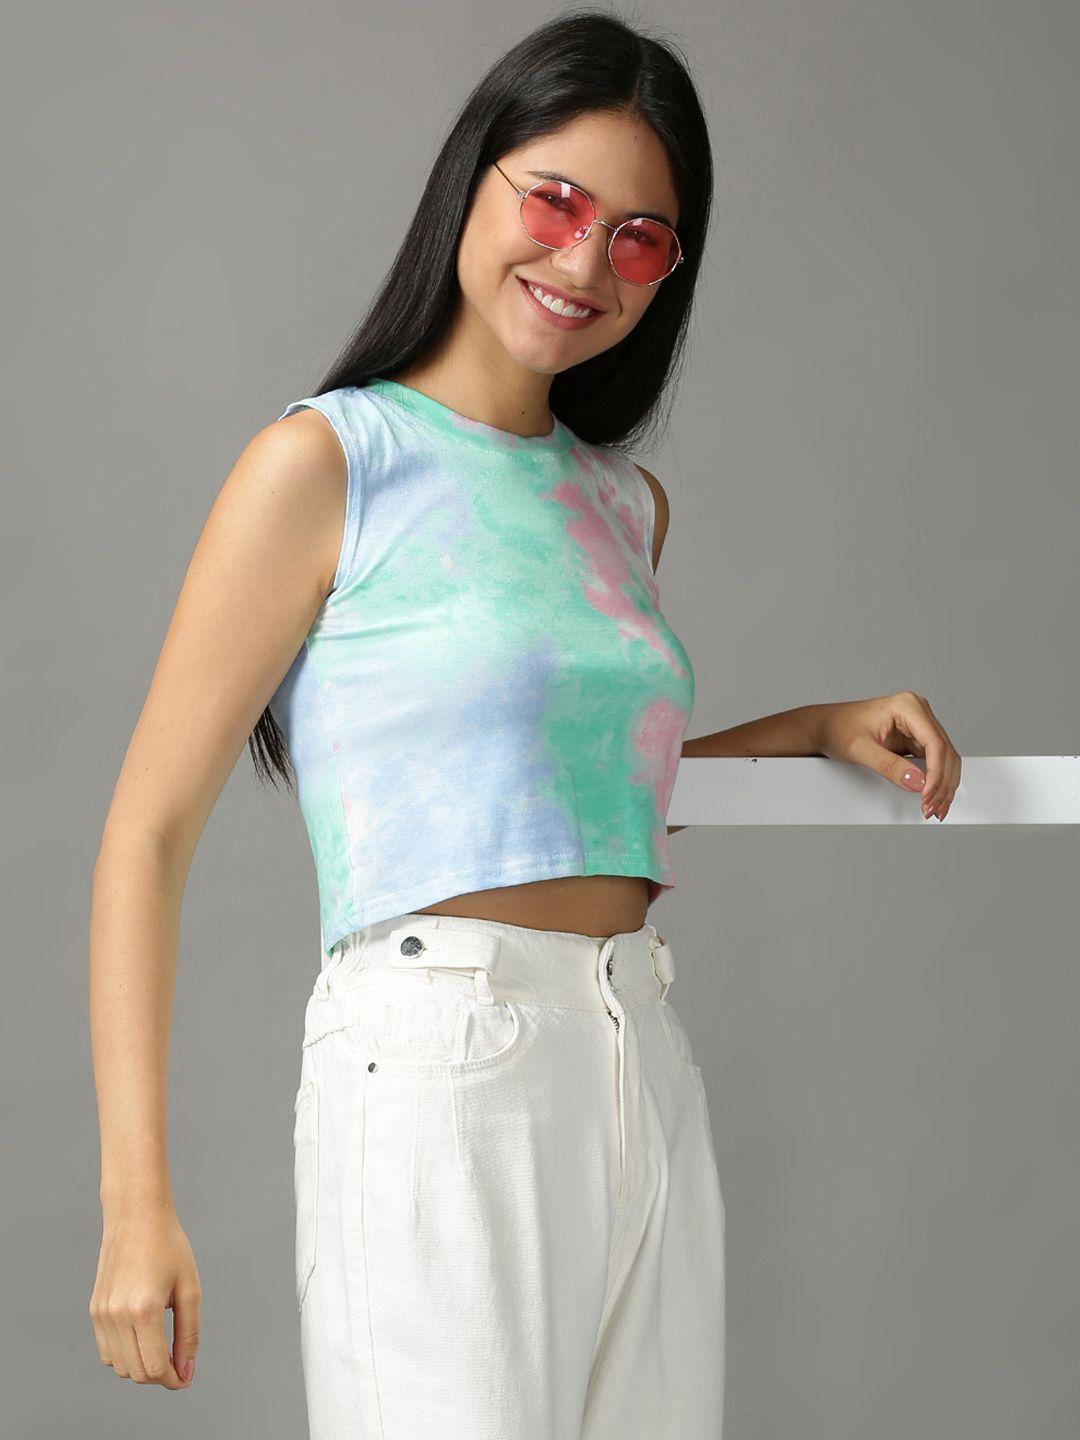 showoff women tie and dyed crop top